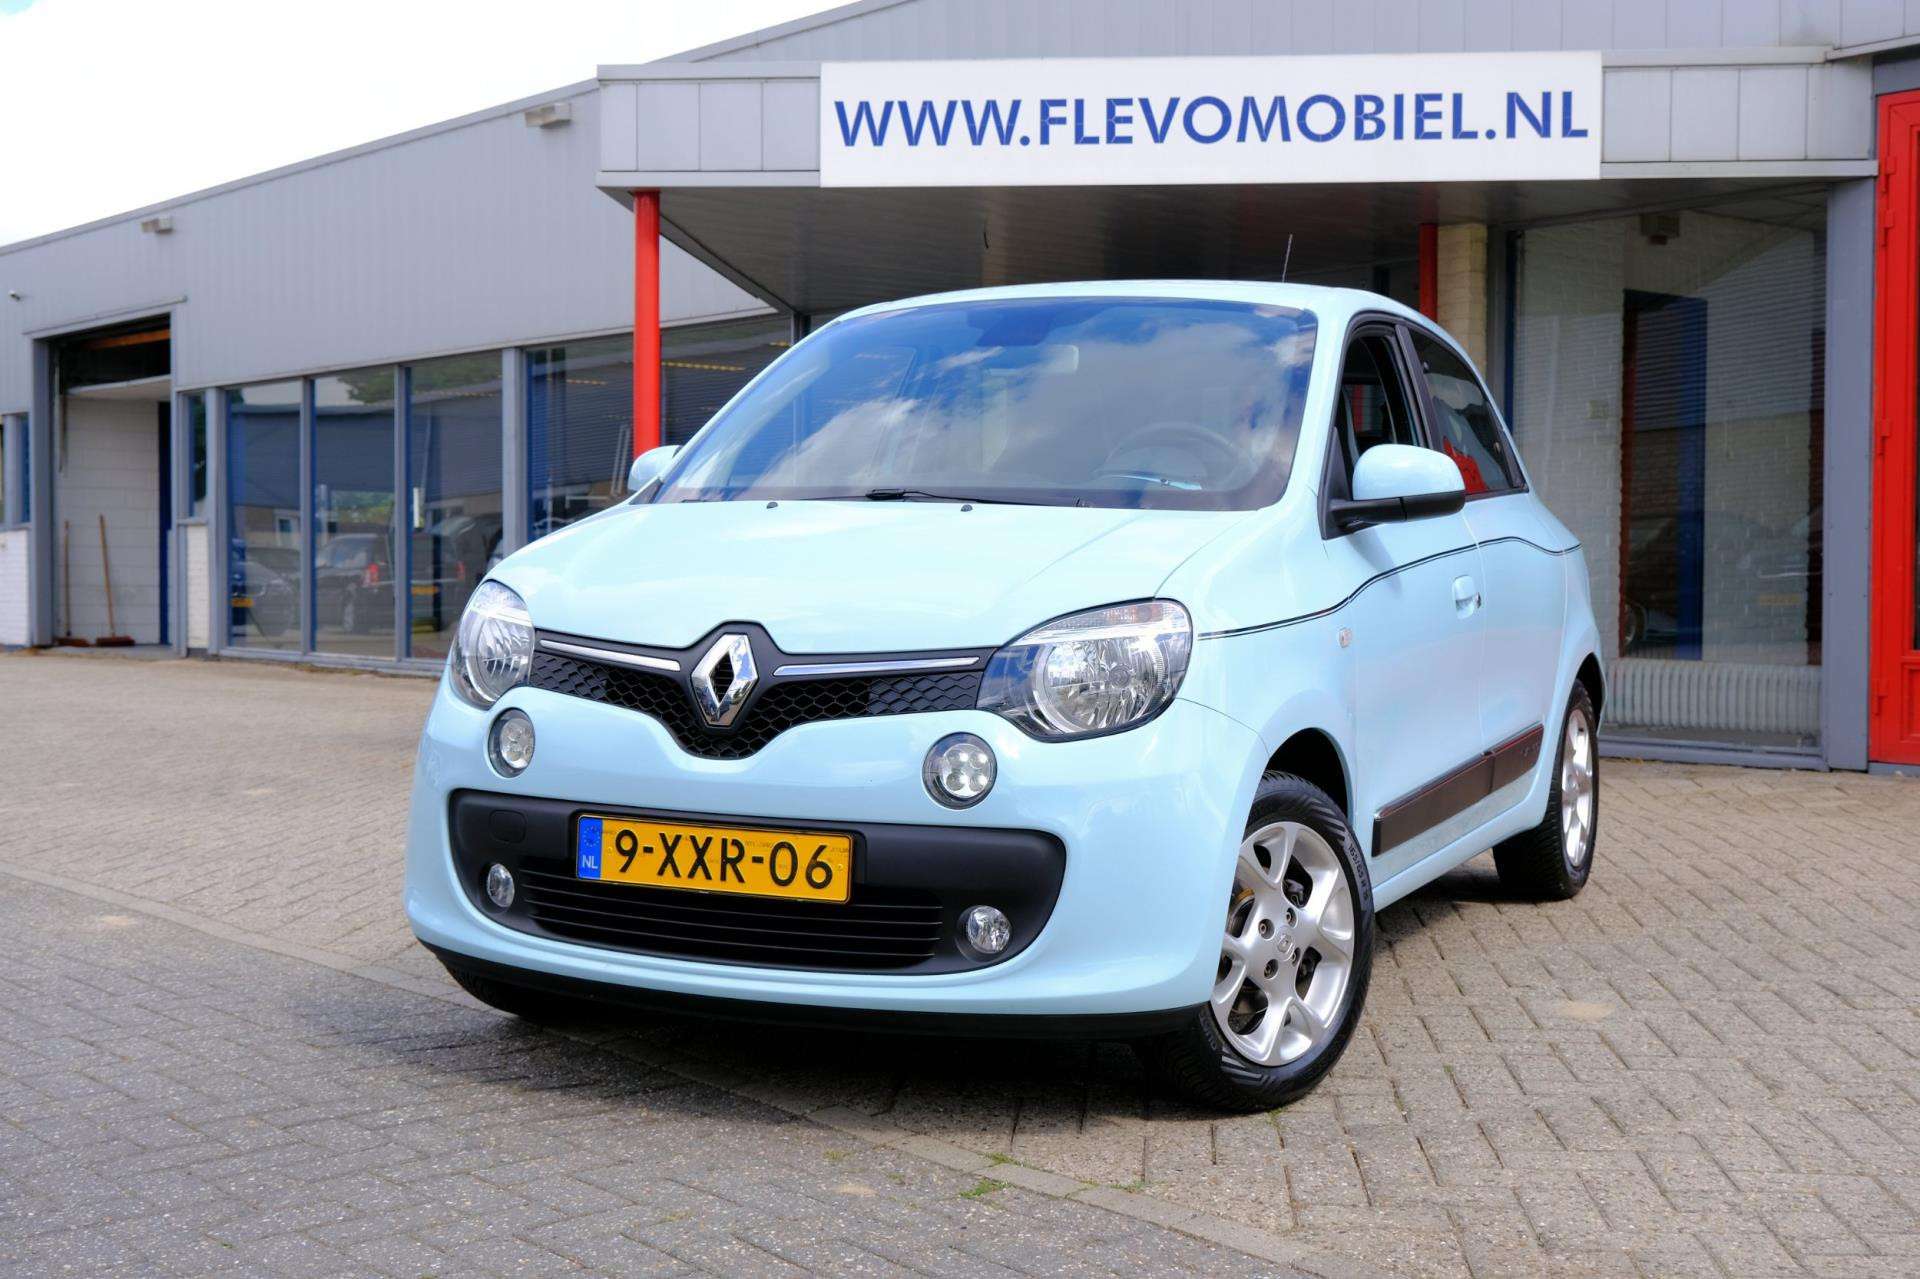 Renault Twingo Compact in Blue used in DRONTEN for € 7,450.-